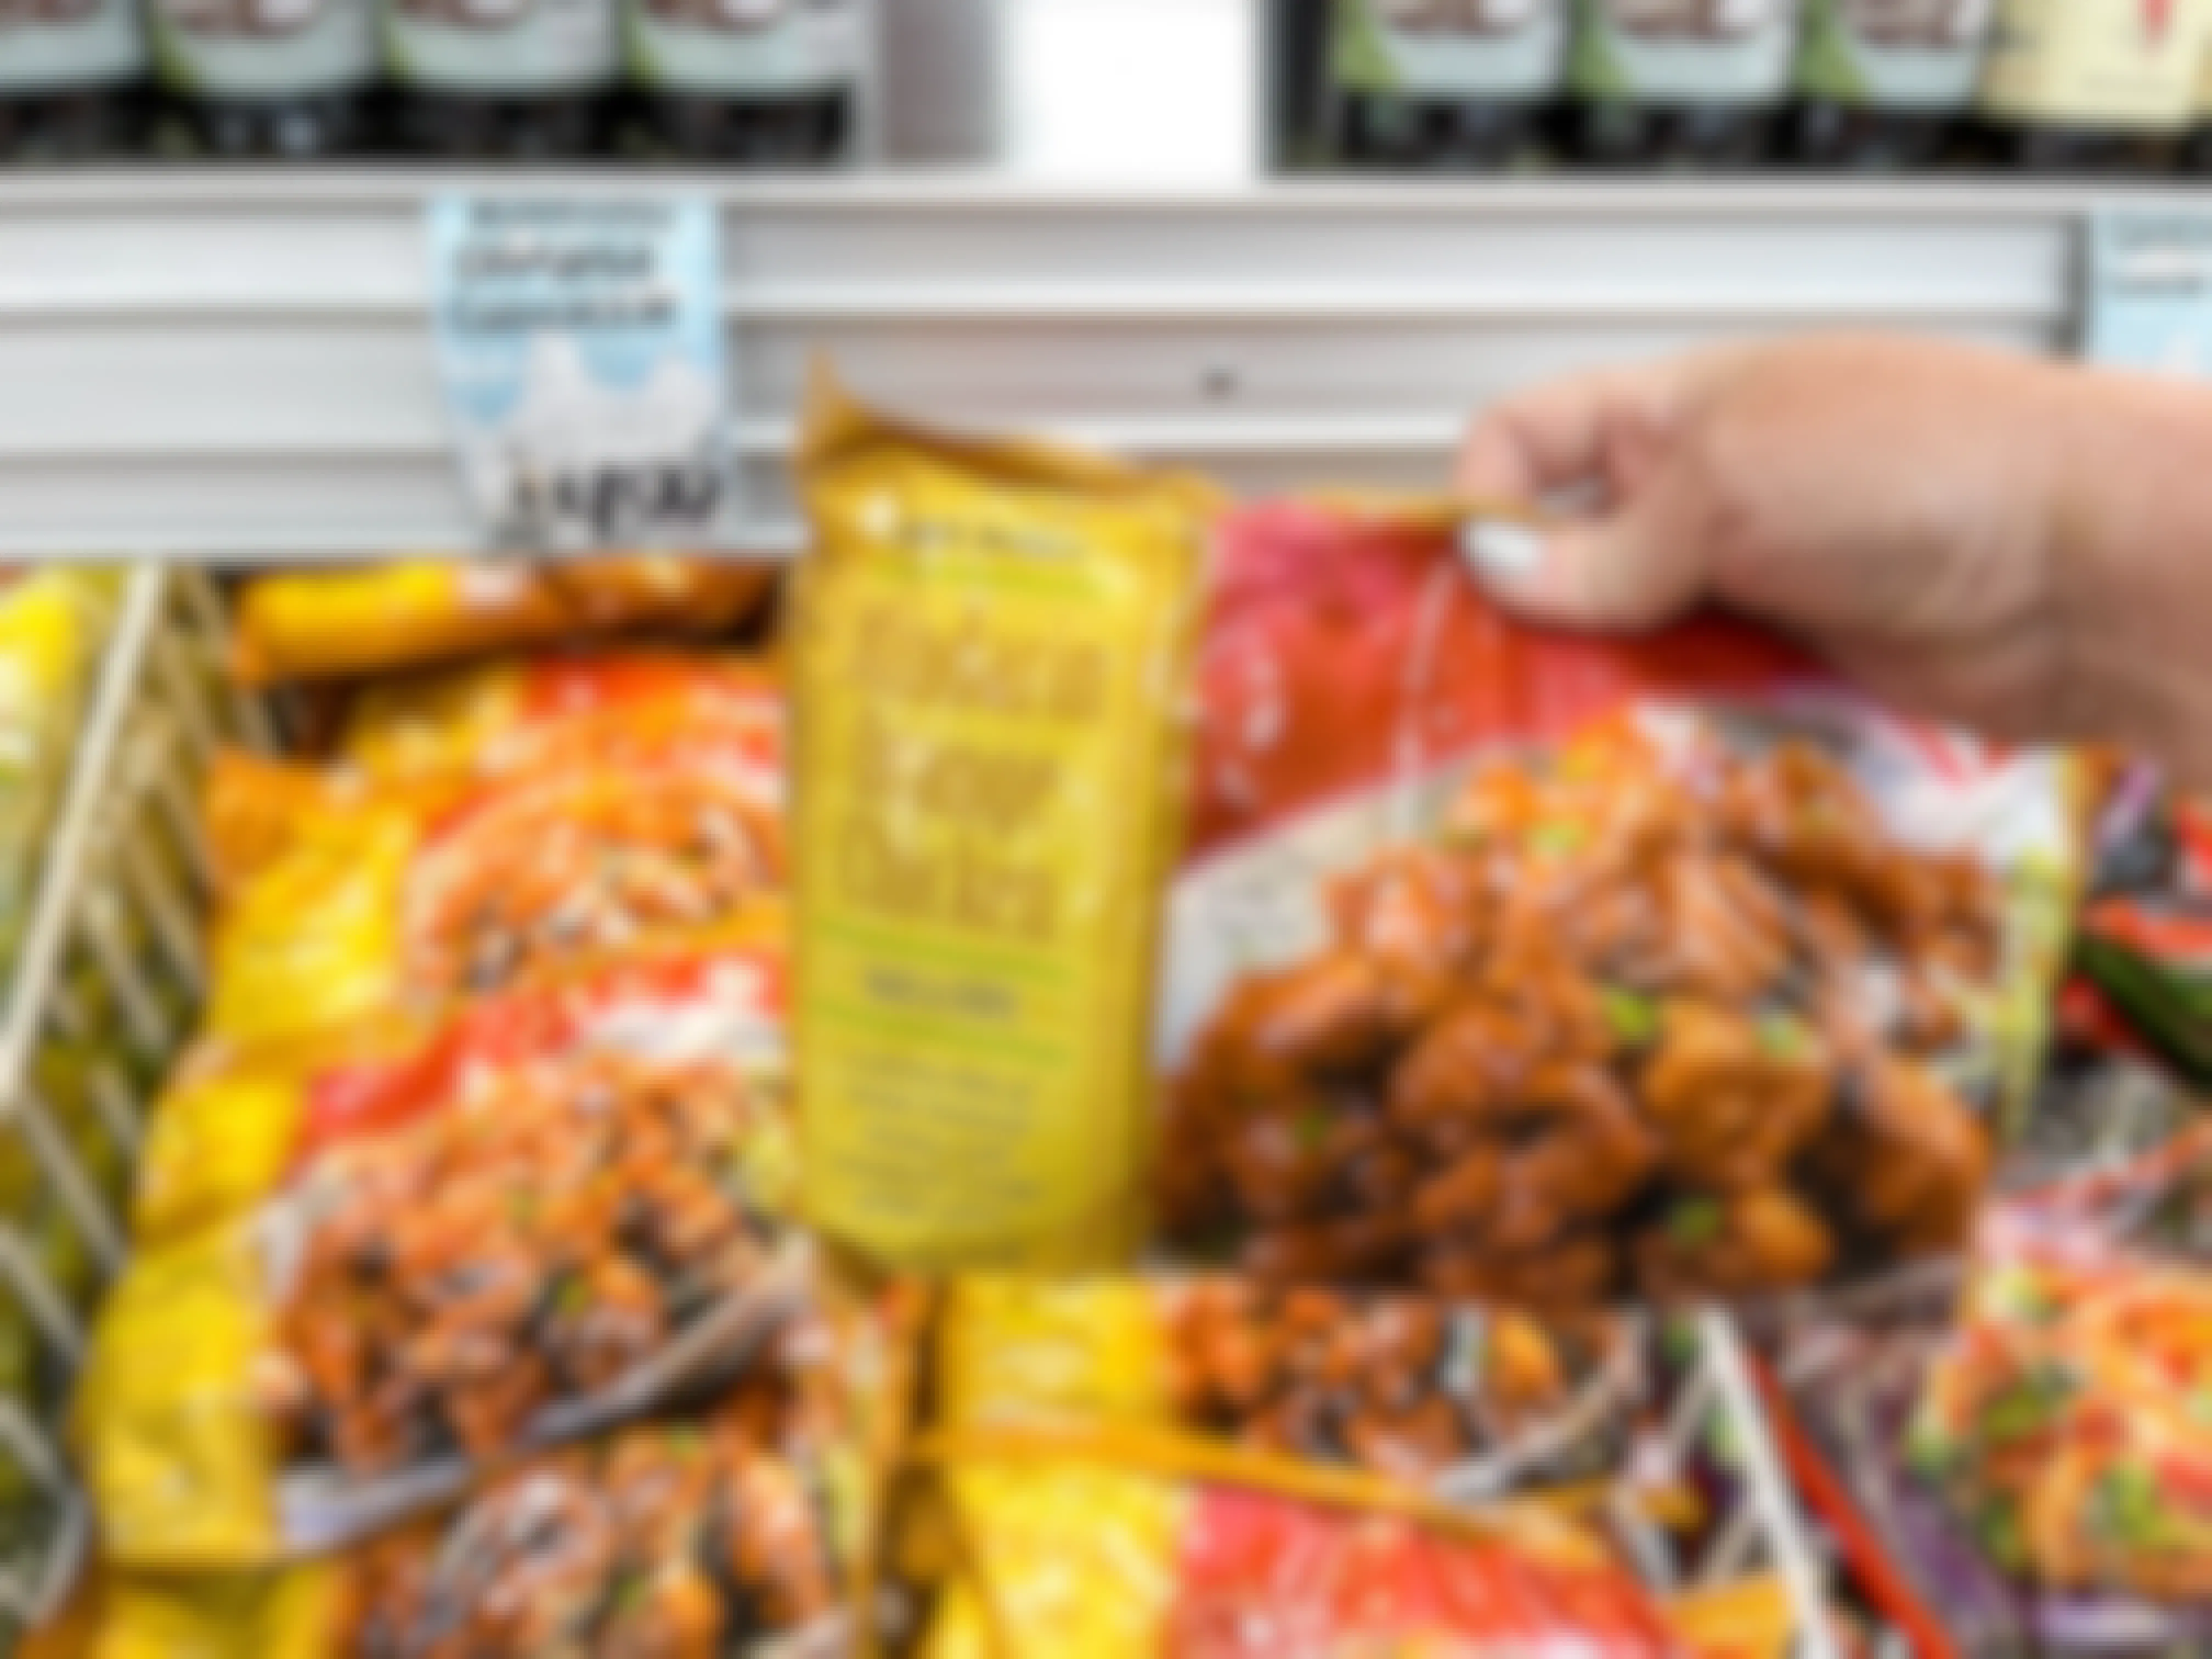 A person's hand holding a bag of Trader Ming's Mandarin Orange Chicken above a display of them at Trader Joe's.